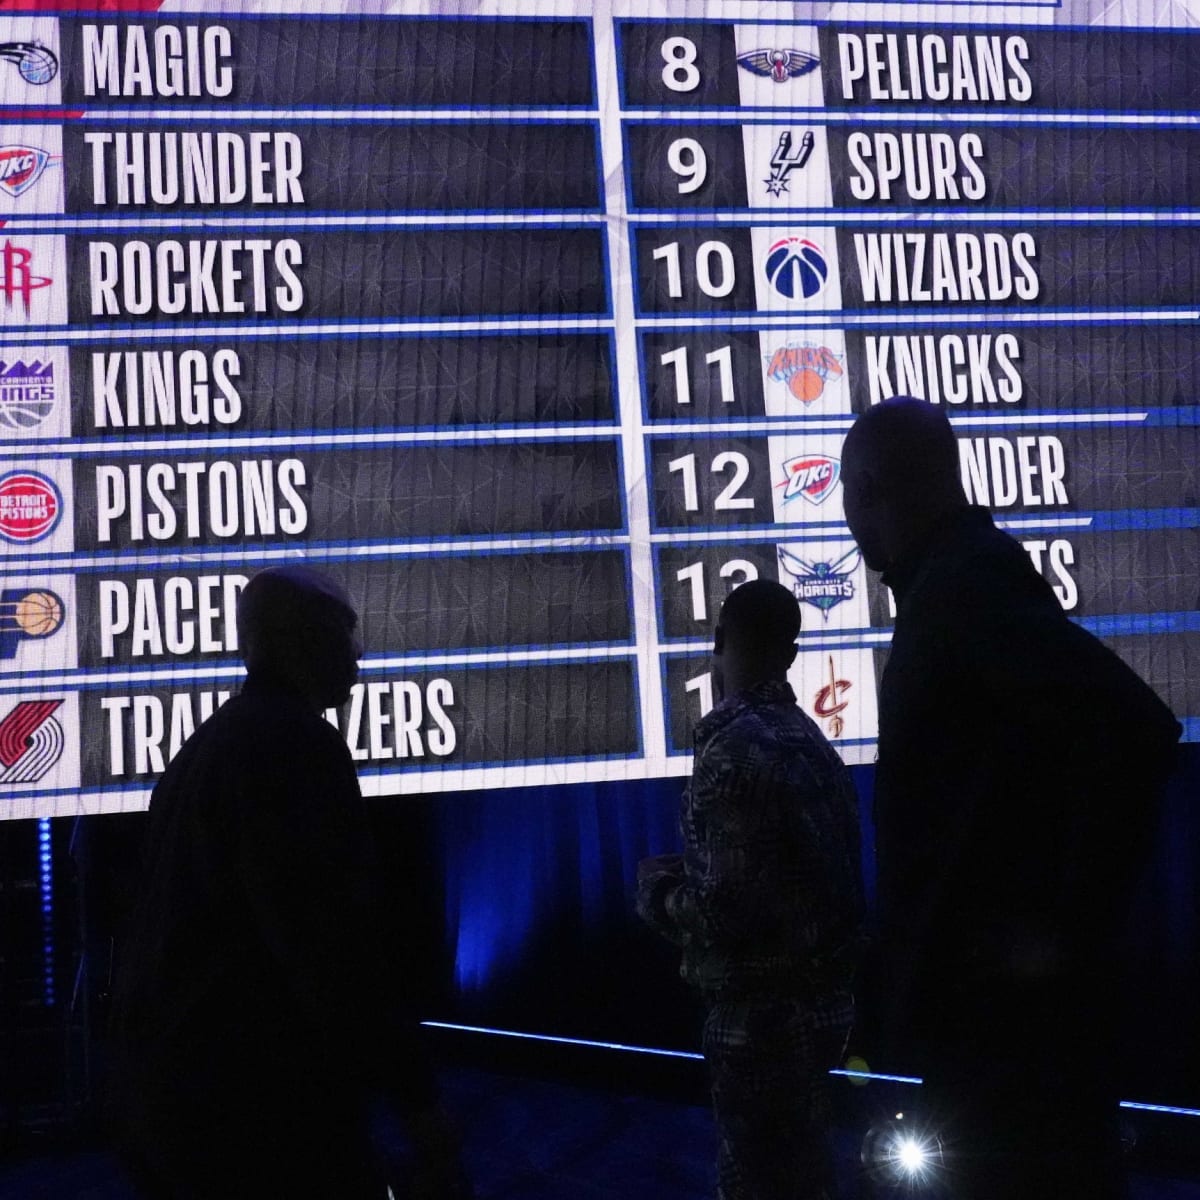 Lakers draft lottery results: Lakers drop to pick No. 7 - Silver Screen and  Roll